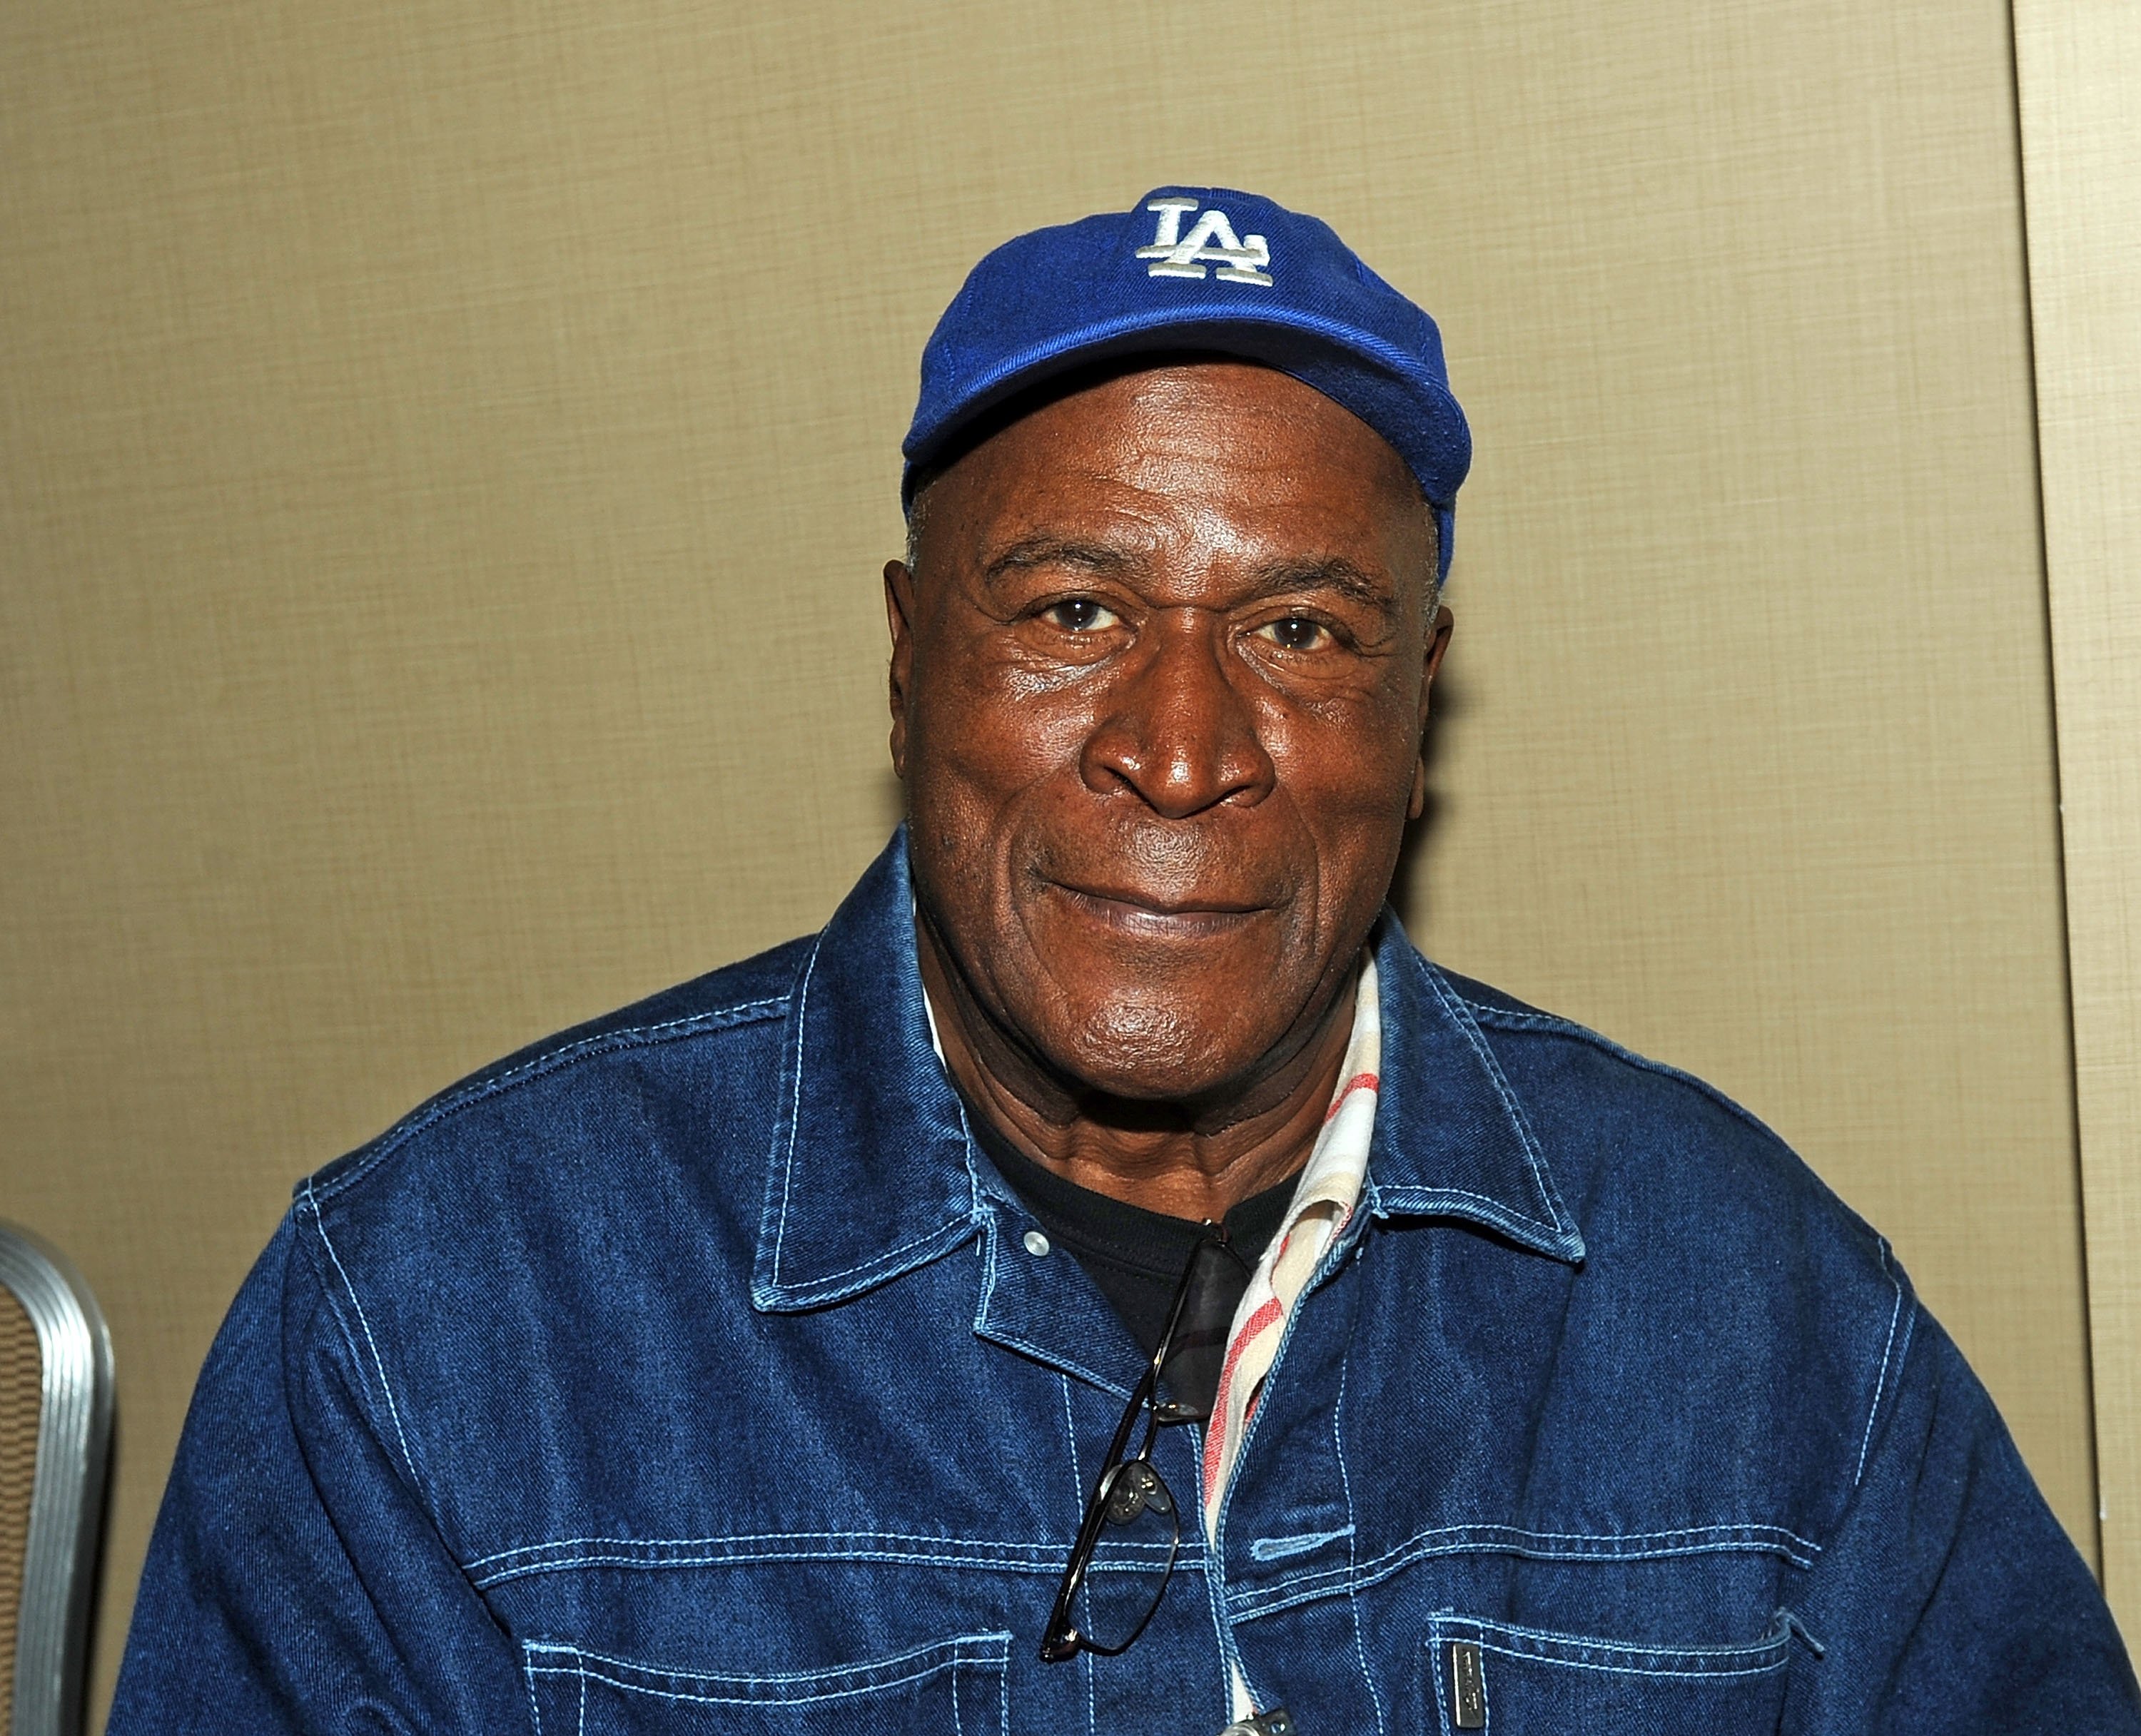 John Amos during Day 1 of the Chiller Theatre Expo at Sheraton Parsippany Hotel on October 24, 2014, in Parsippany, New Jersey. | Source: Getty Images